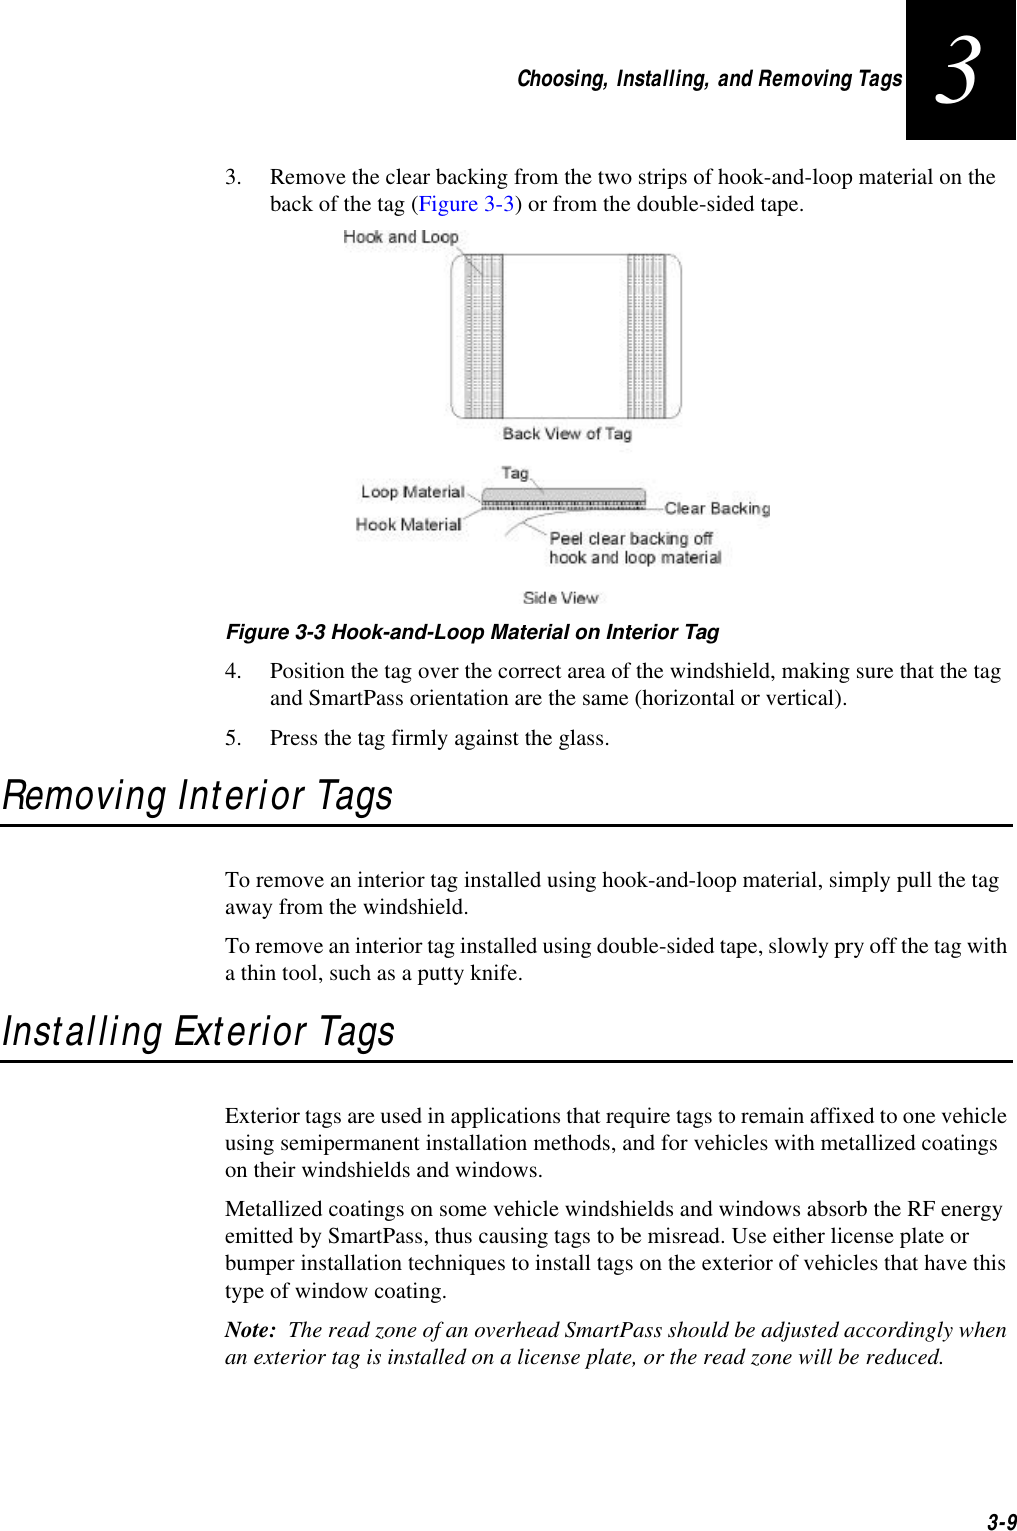 Choosing, Installing, and Removing Tags3-933. Remove the clear backing from the two strips of hook-and-loop material on the back of the tag (Figure 3-3) or from the double-sided tape.Figure 3-3 Hook-and-Loop Material on Interior Tag4. Position the tag over the correct area of the windshield, making sure that the tag and SmartPass orientation are the same (horizontal or vertical).5. Press the tag firmly against the glass.Removing Interior TagsTo remove an interior tag installed using hook-and-loop material, simply pull the tag away from the windshield.To remove an interior tag installed using double-sided tape, slowly pry off the tag with a thin tool, such as a putty knife.Installing Exterior TagsExterior tags are used in applications that require tags to remain affixed to one vehicle using semipermanent installation methods, and for vehicles with metallized coatings on their windshields and windows.Metallized coatings on some vehicle windshields and windows absorb the RF energy emitted by SmartPass, thus causing tags to be misread. Use either license plate or bumper installation techniques to install tags on the exterior of vehicles that have this type of window coating.Note:  The read zone of an overhead SmartPass should be adjusted accordingly when an exterior tag is installed on a license plate, or the read zone will be reduced. 